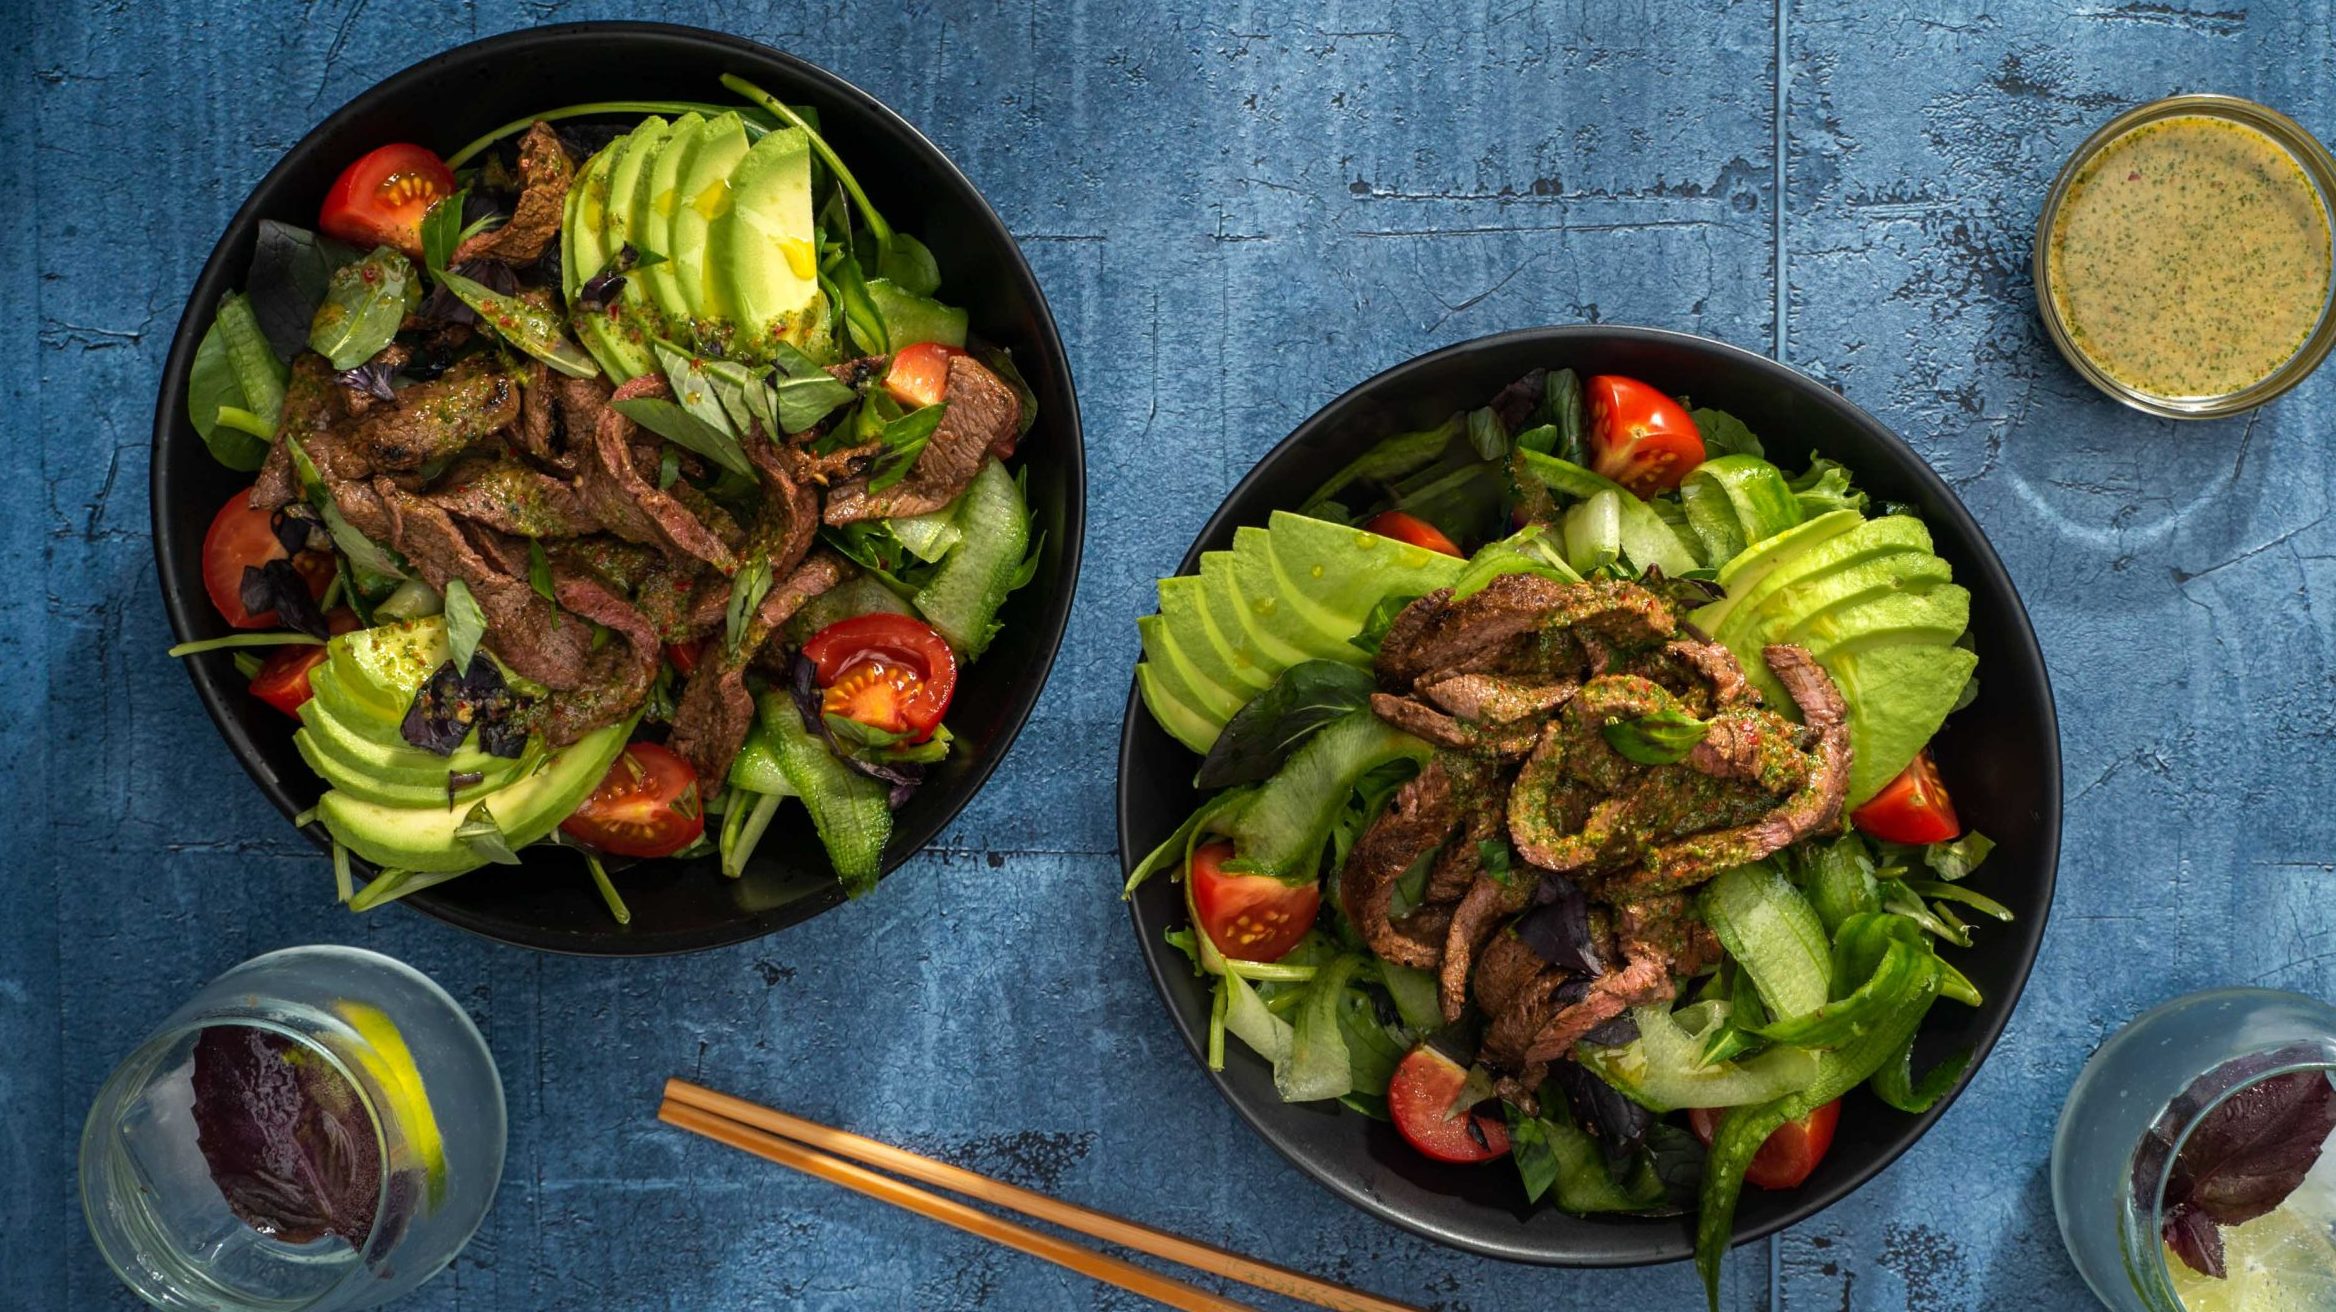 Two black bowls of salad with avocado and meat strips.